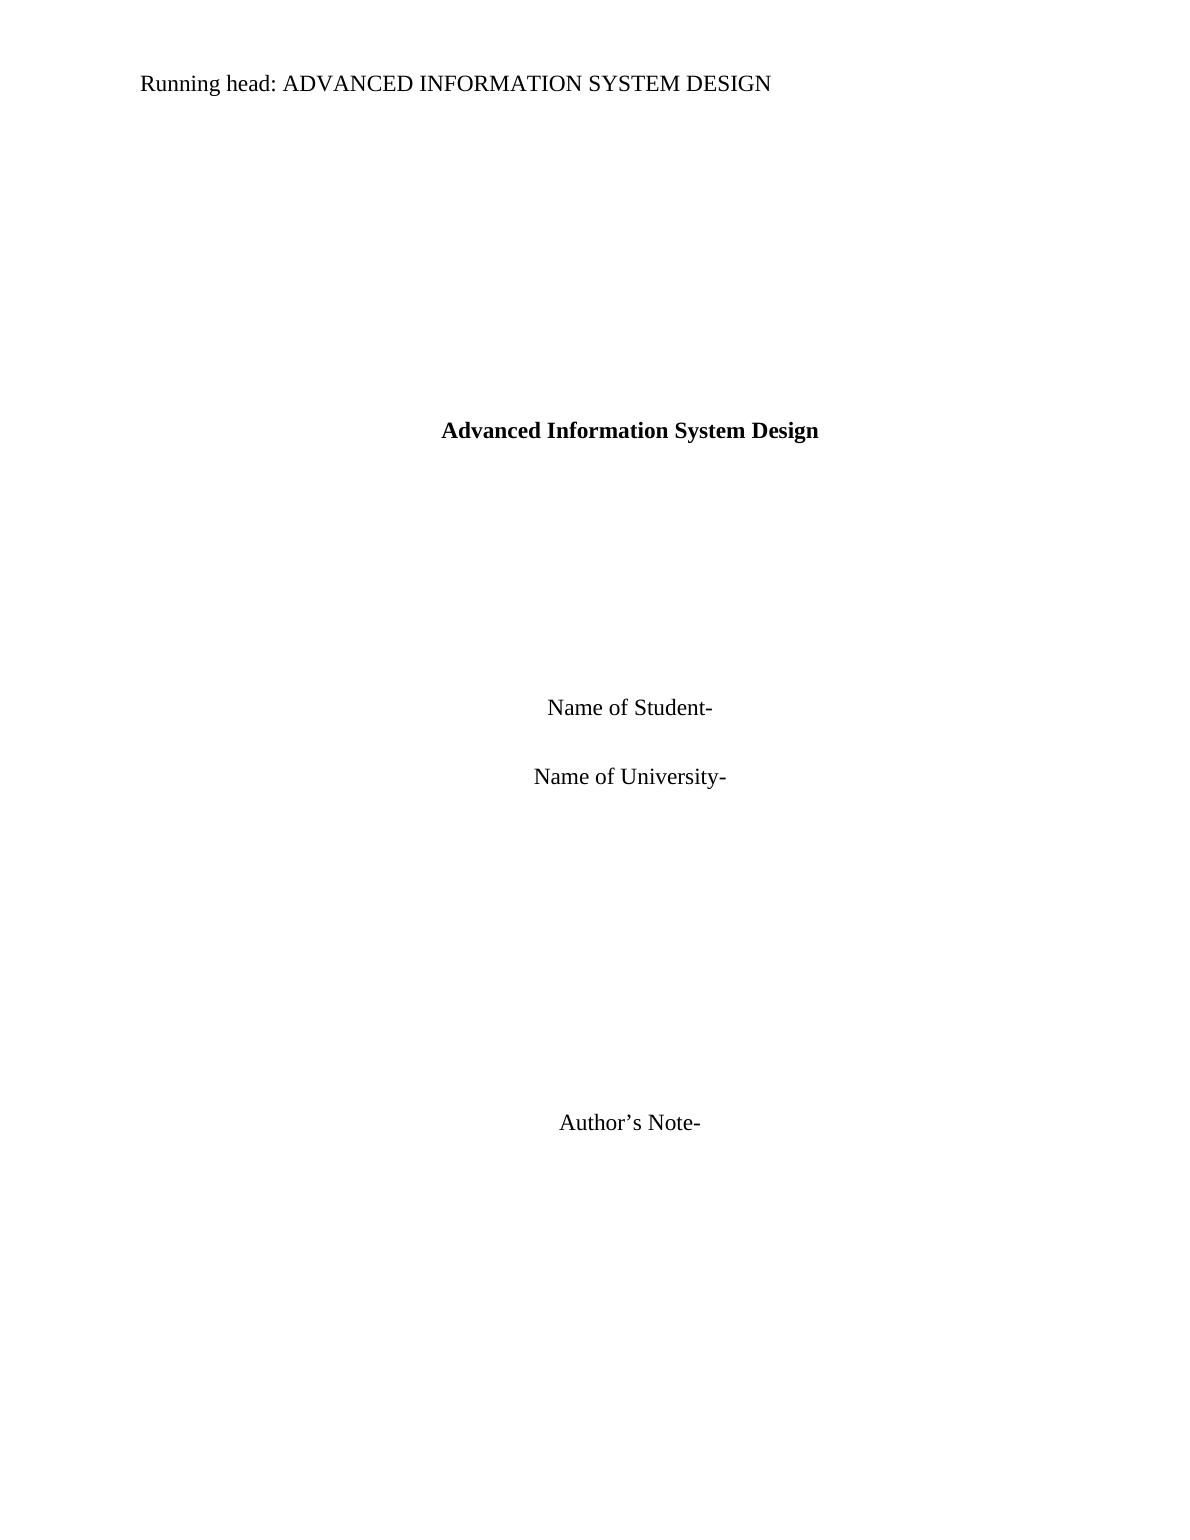 The Advanced Information System Design_1